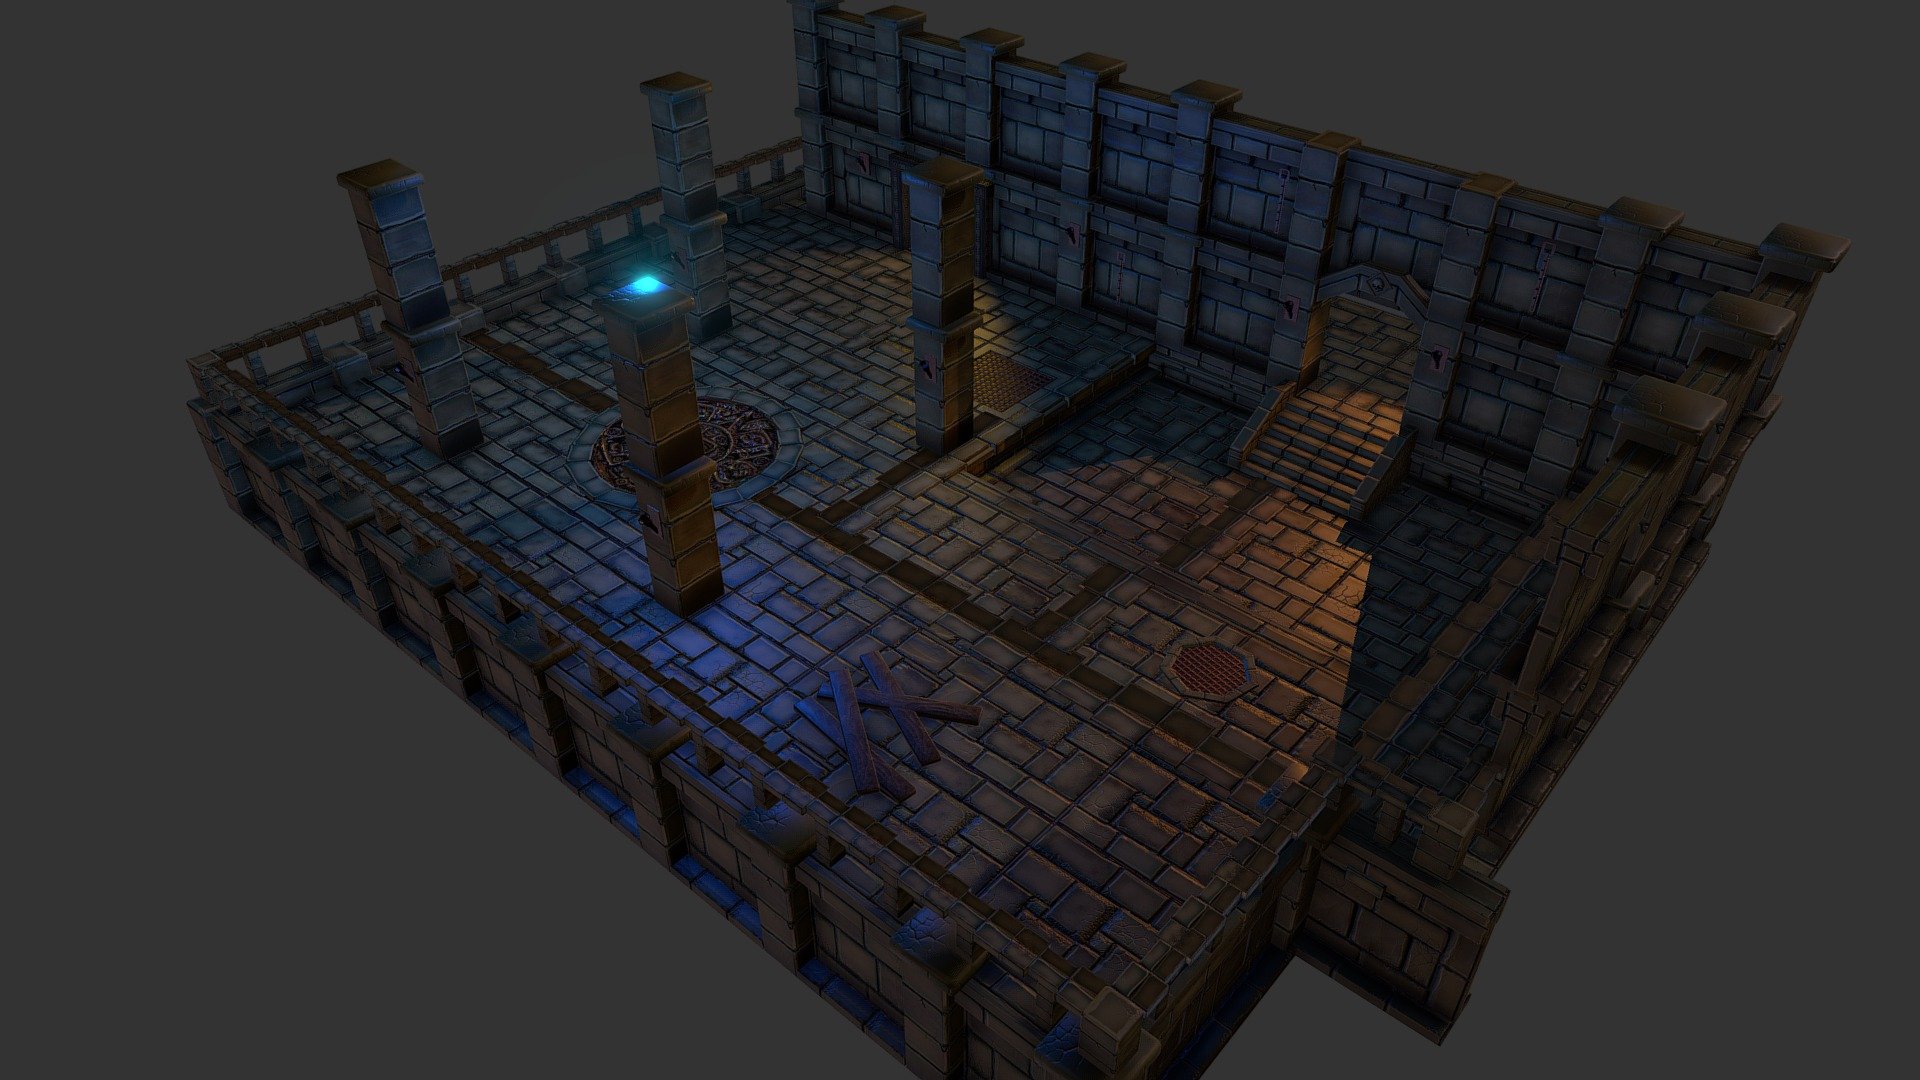 A modular design enables you to build your own seamless dungeon with countless rooms and passageways of different sizes and proportions.  The model size is kept to a minimum with a 2048 pbr material applied to all pieces.

if you want the fbx here it is. Click on the link below.
https://drive.google.com/open?id=1m_vM0nvHwI7Lgghty6NXBaVlB-kGv_9L - Modular Myan Inspired Dungeon - Download Free 3D model by Rakshaan 3d model